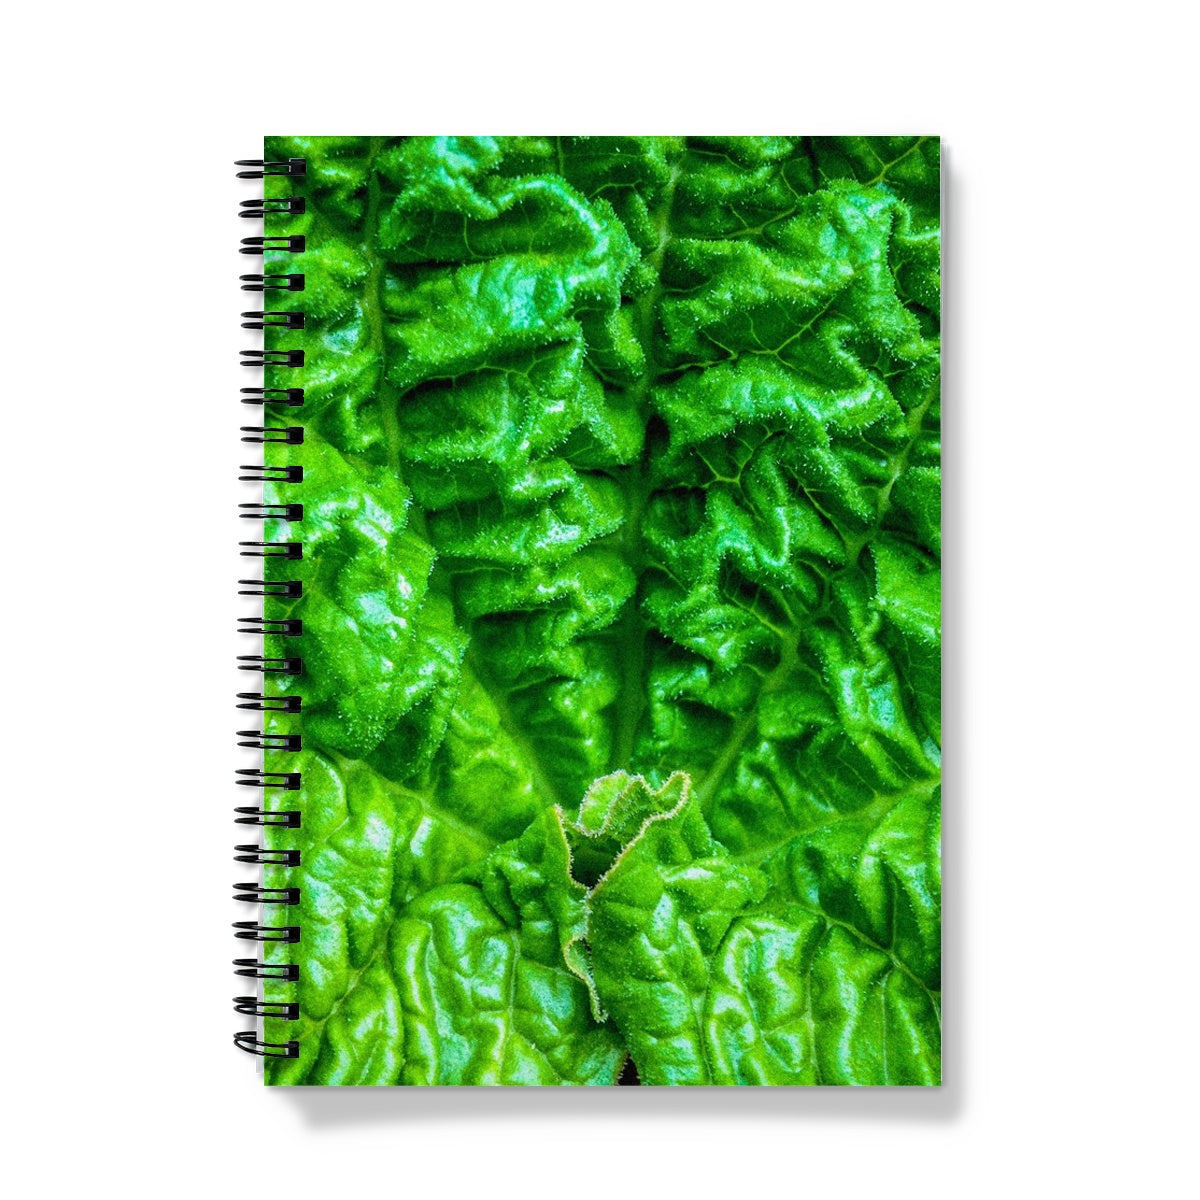 Close-up of the textured surface of a vivid green young rhubarb leaf Notebook